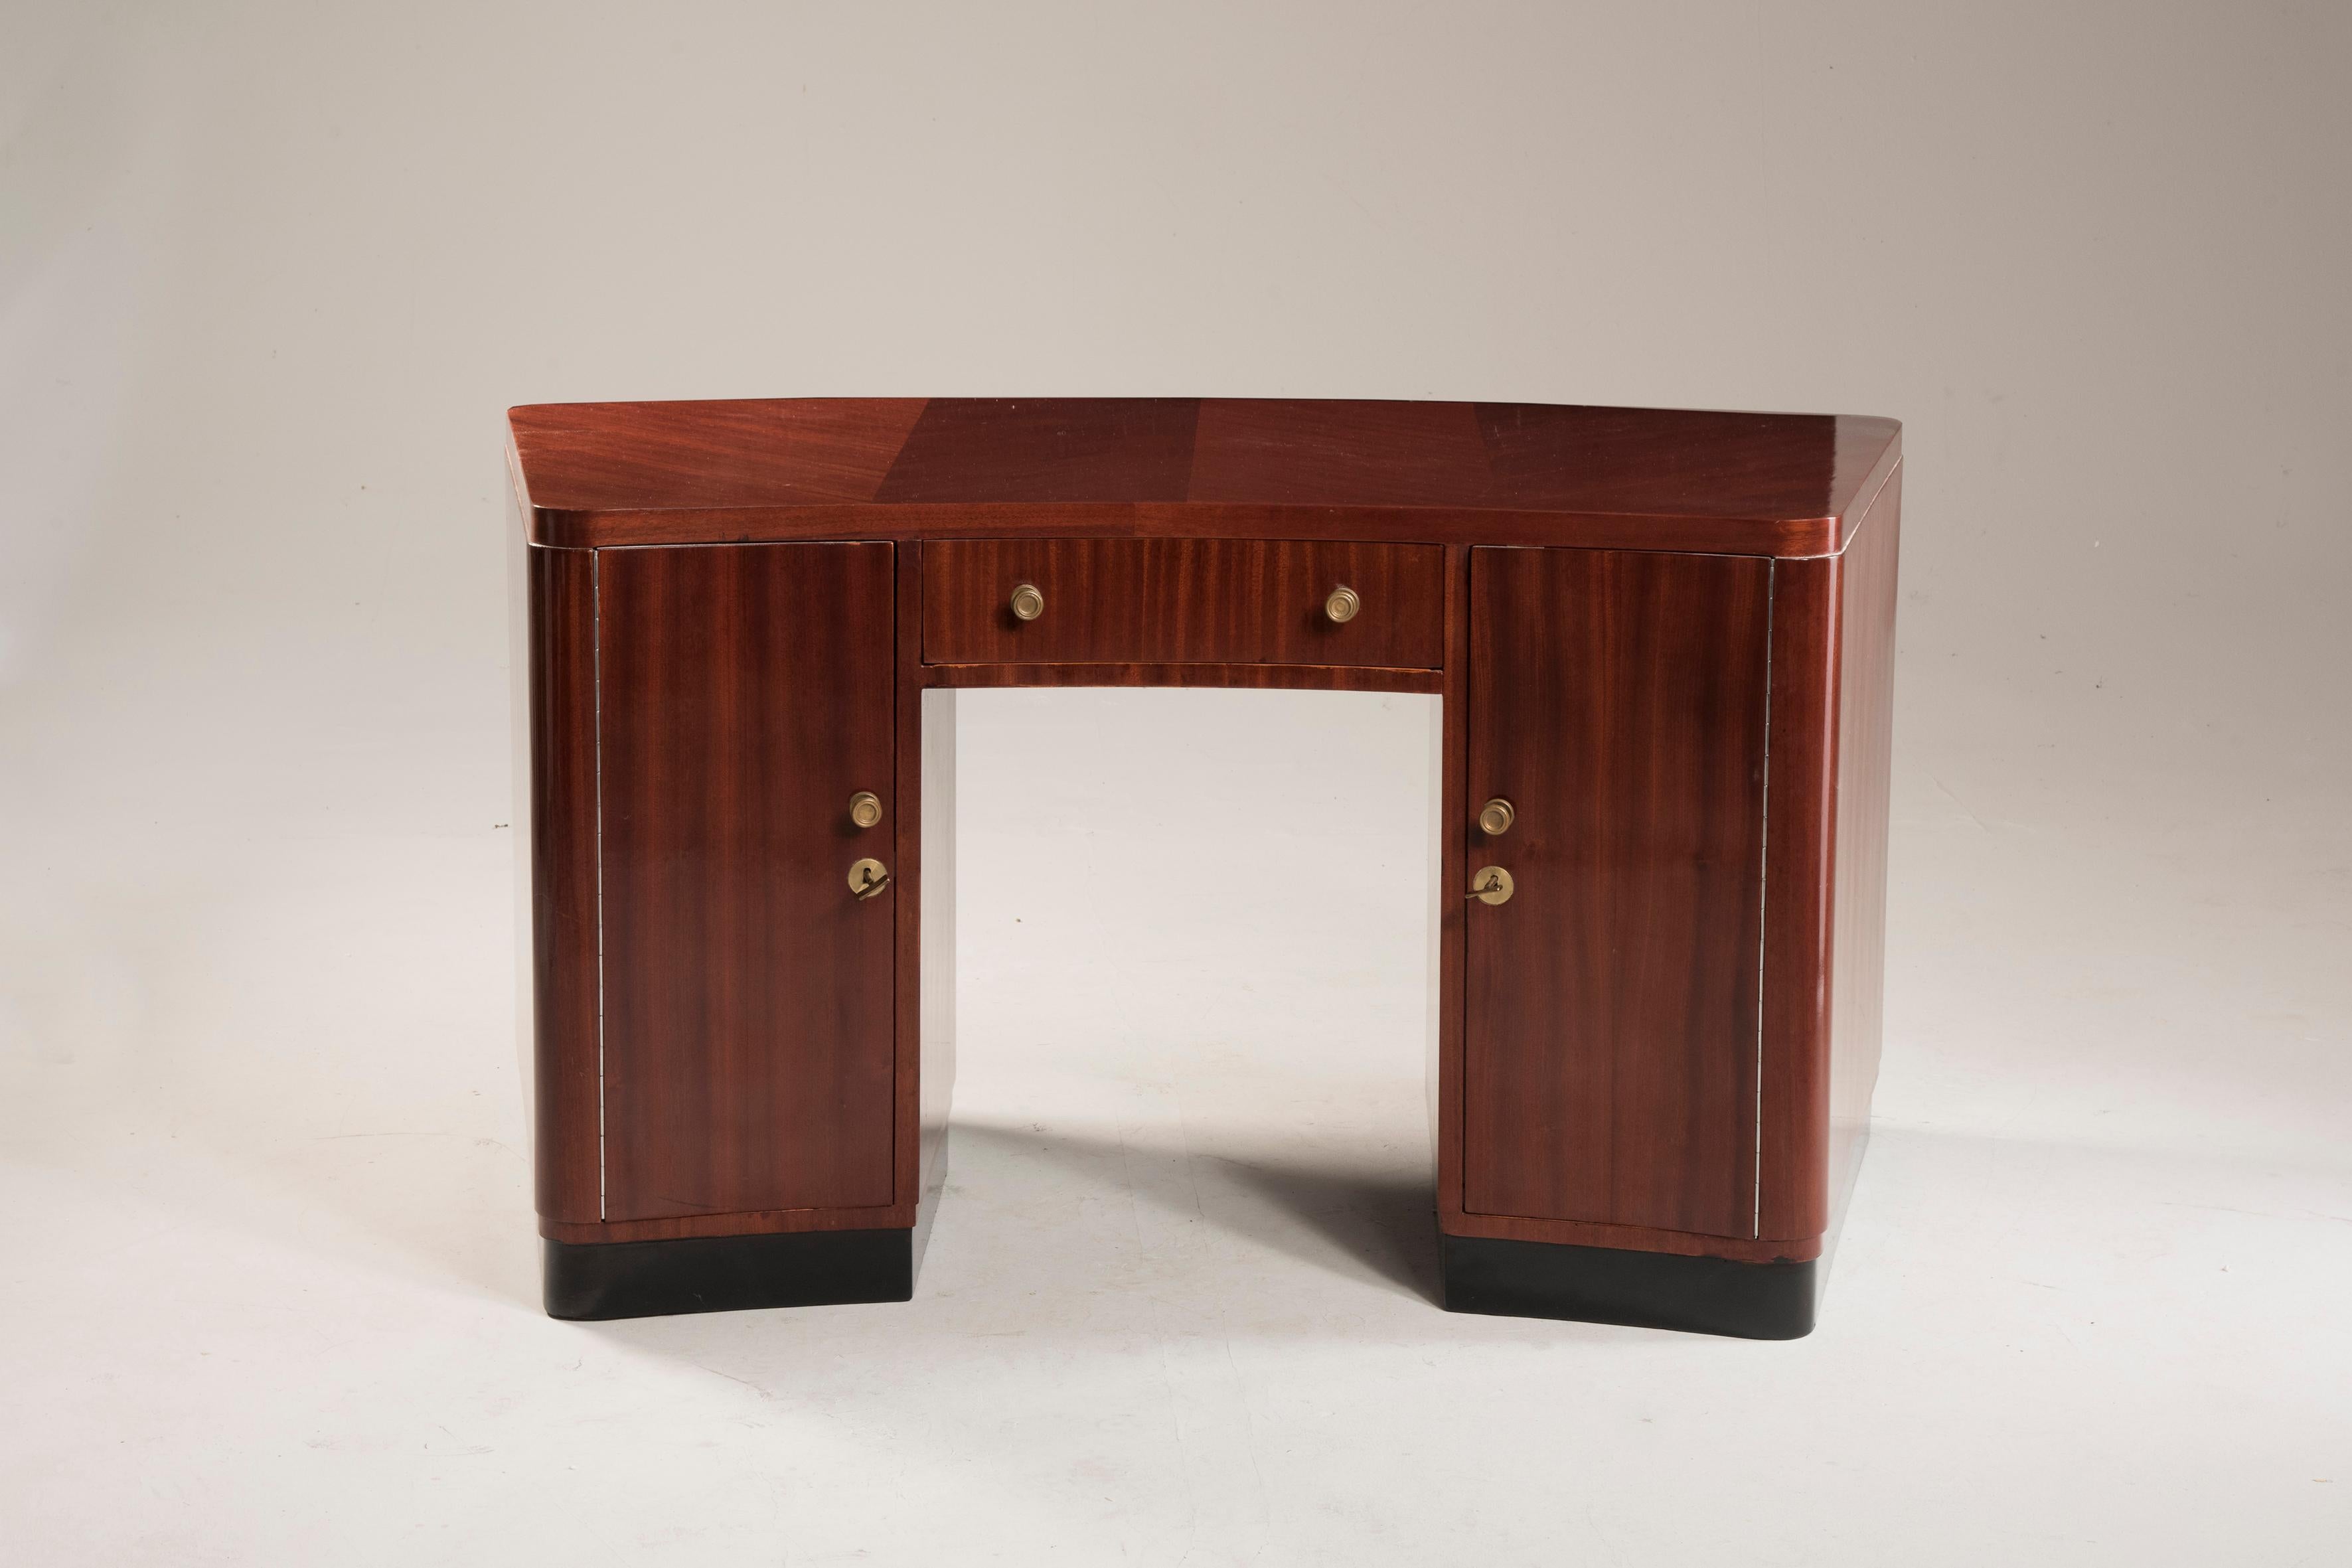 French Art Deco Mahogany Curved Desk with doors and drawers